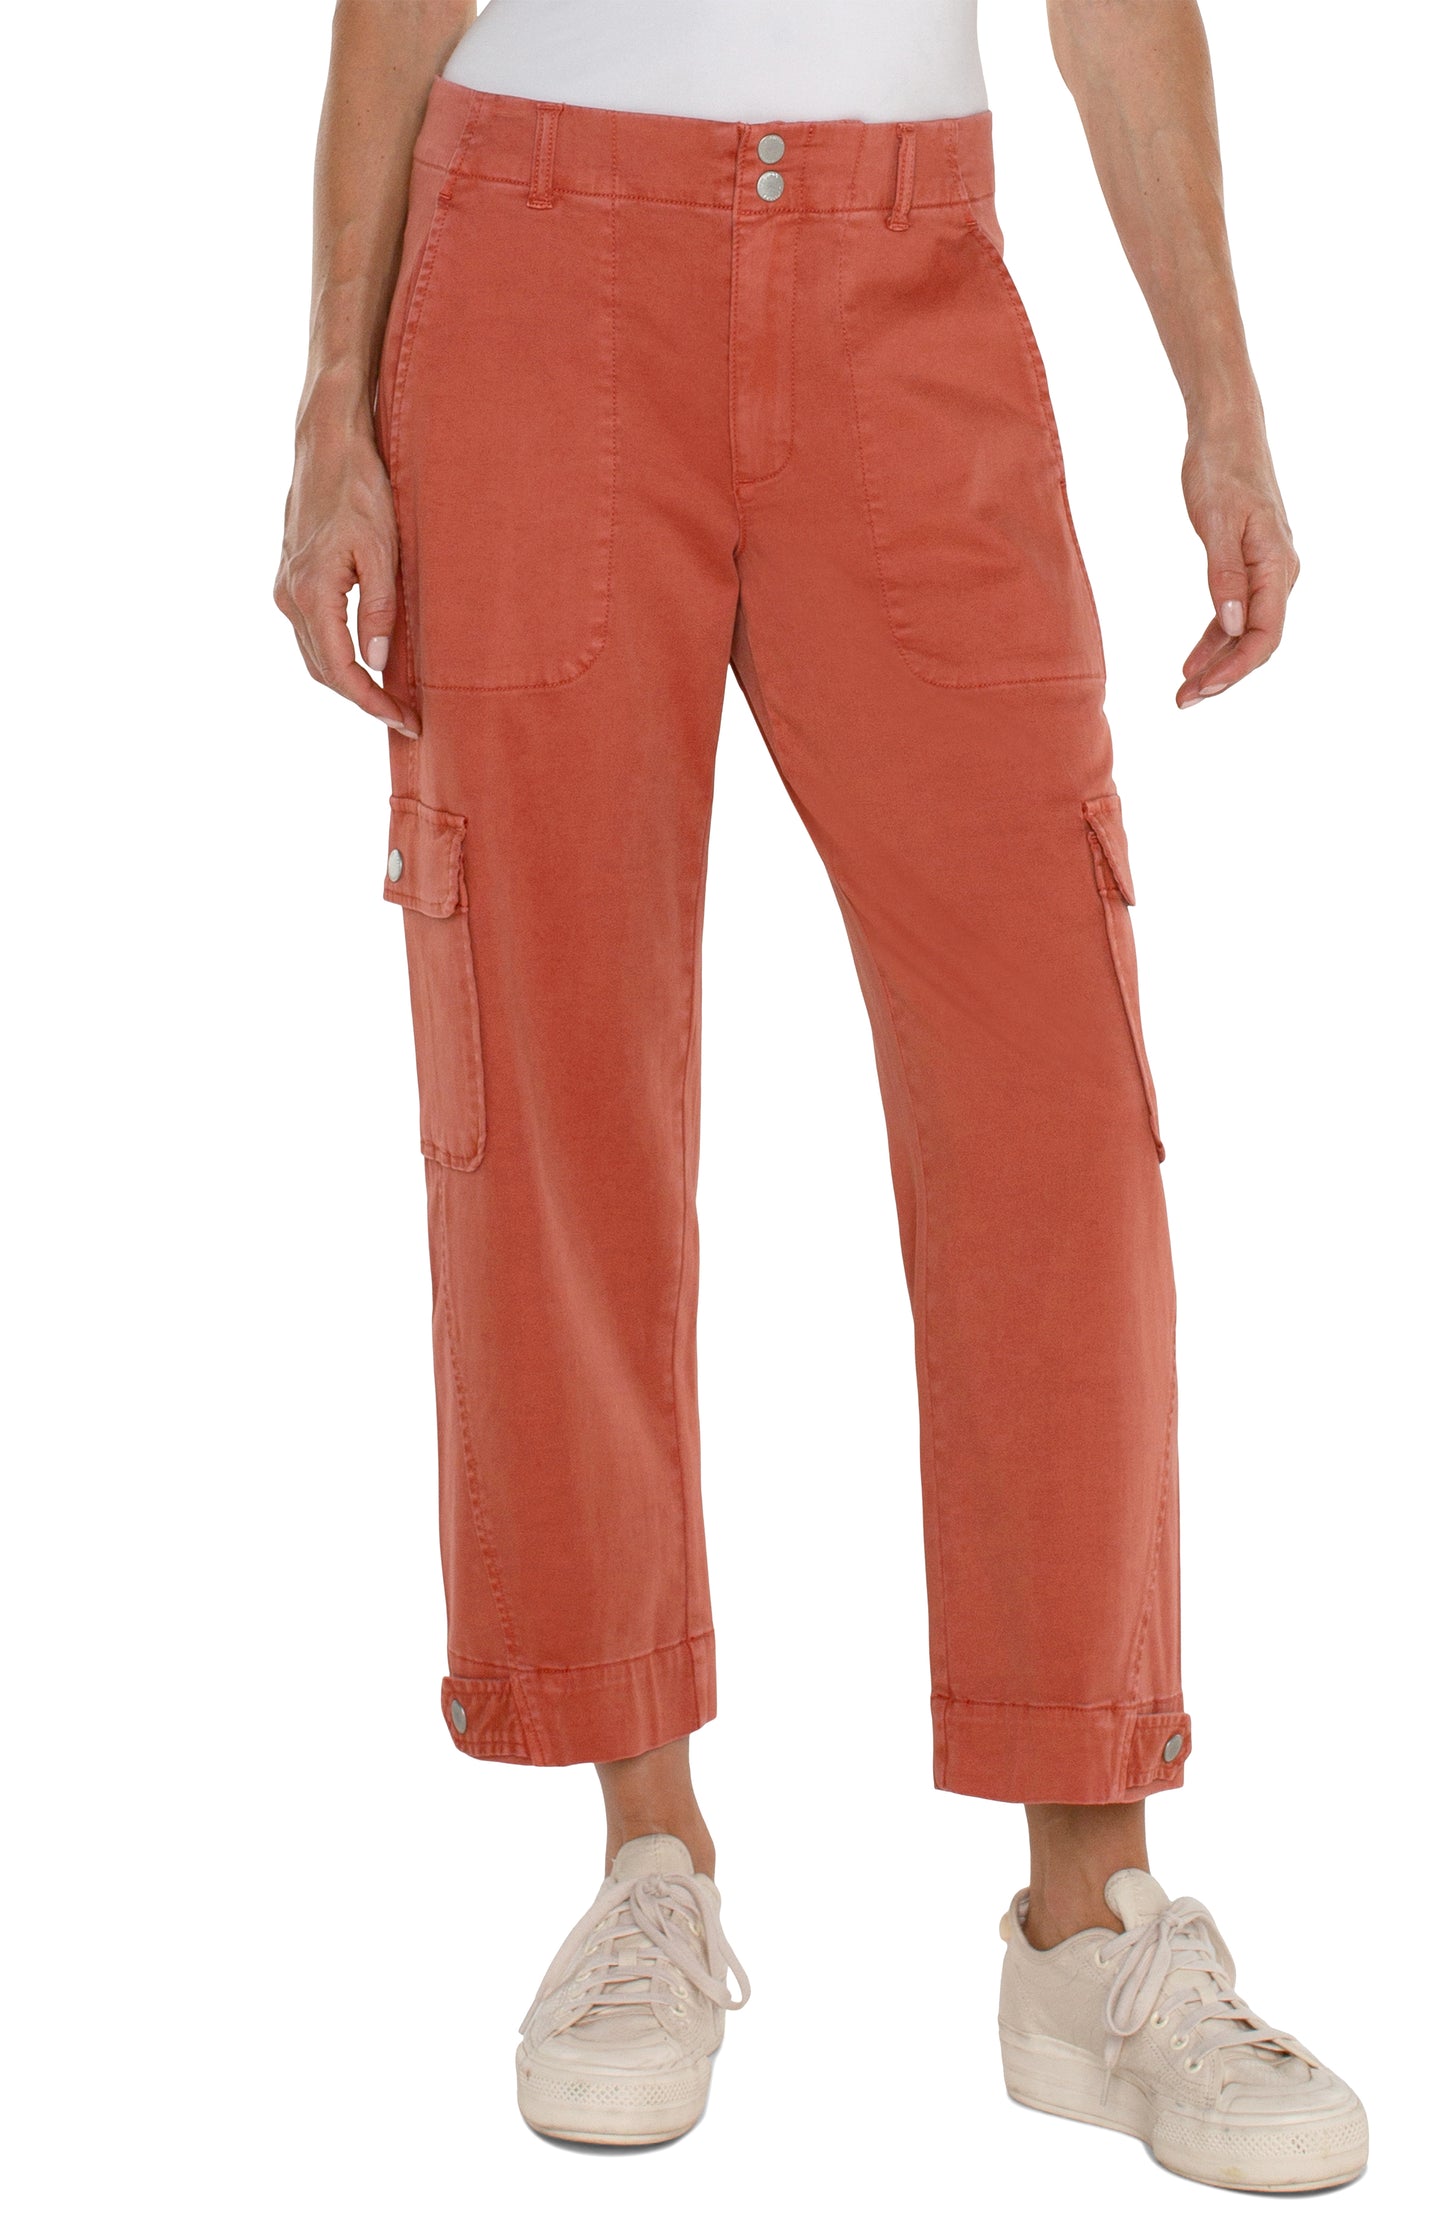 Utility Crop with Tab Hem and Cargo Pockets 26 inch inseam (Terracotta)